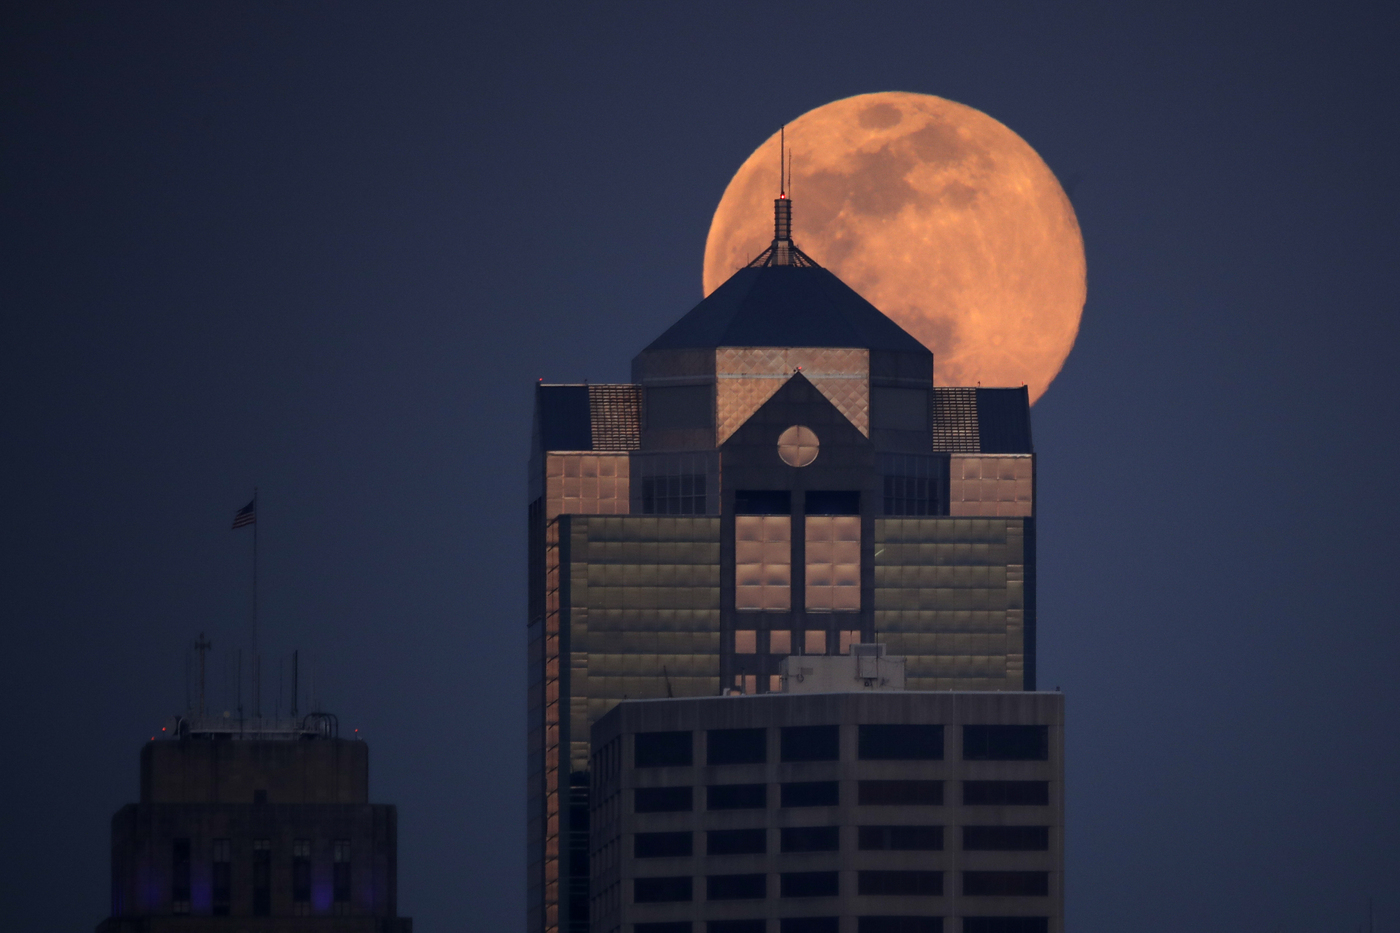 The supermoon rises behind a downtown office building in Kansas City, Mo., Tuesday, April 7, 2020. (AP Photo/Charlie Riedel)